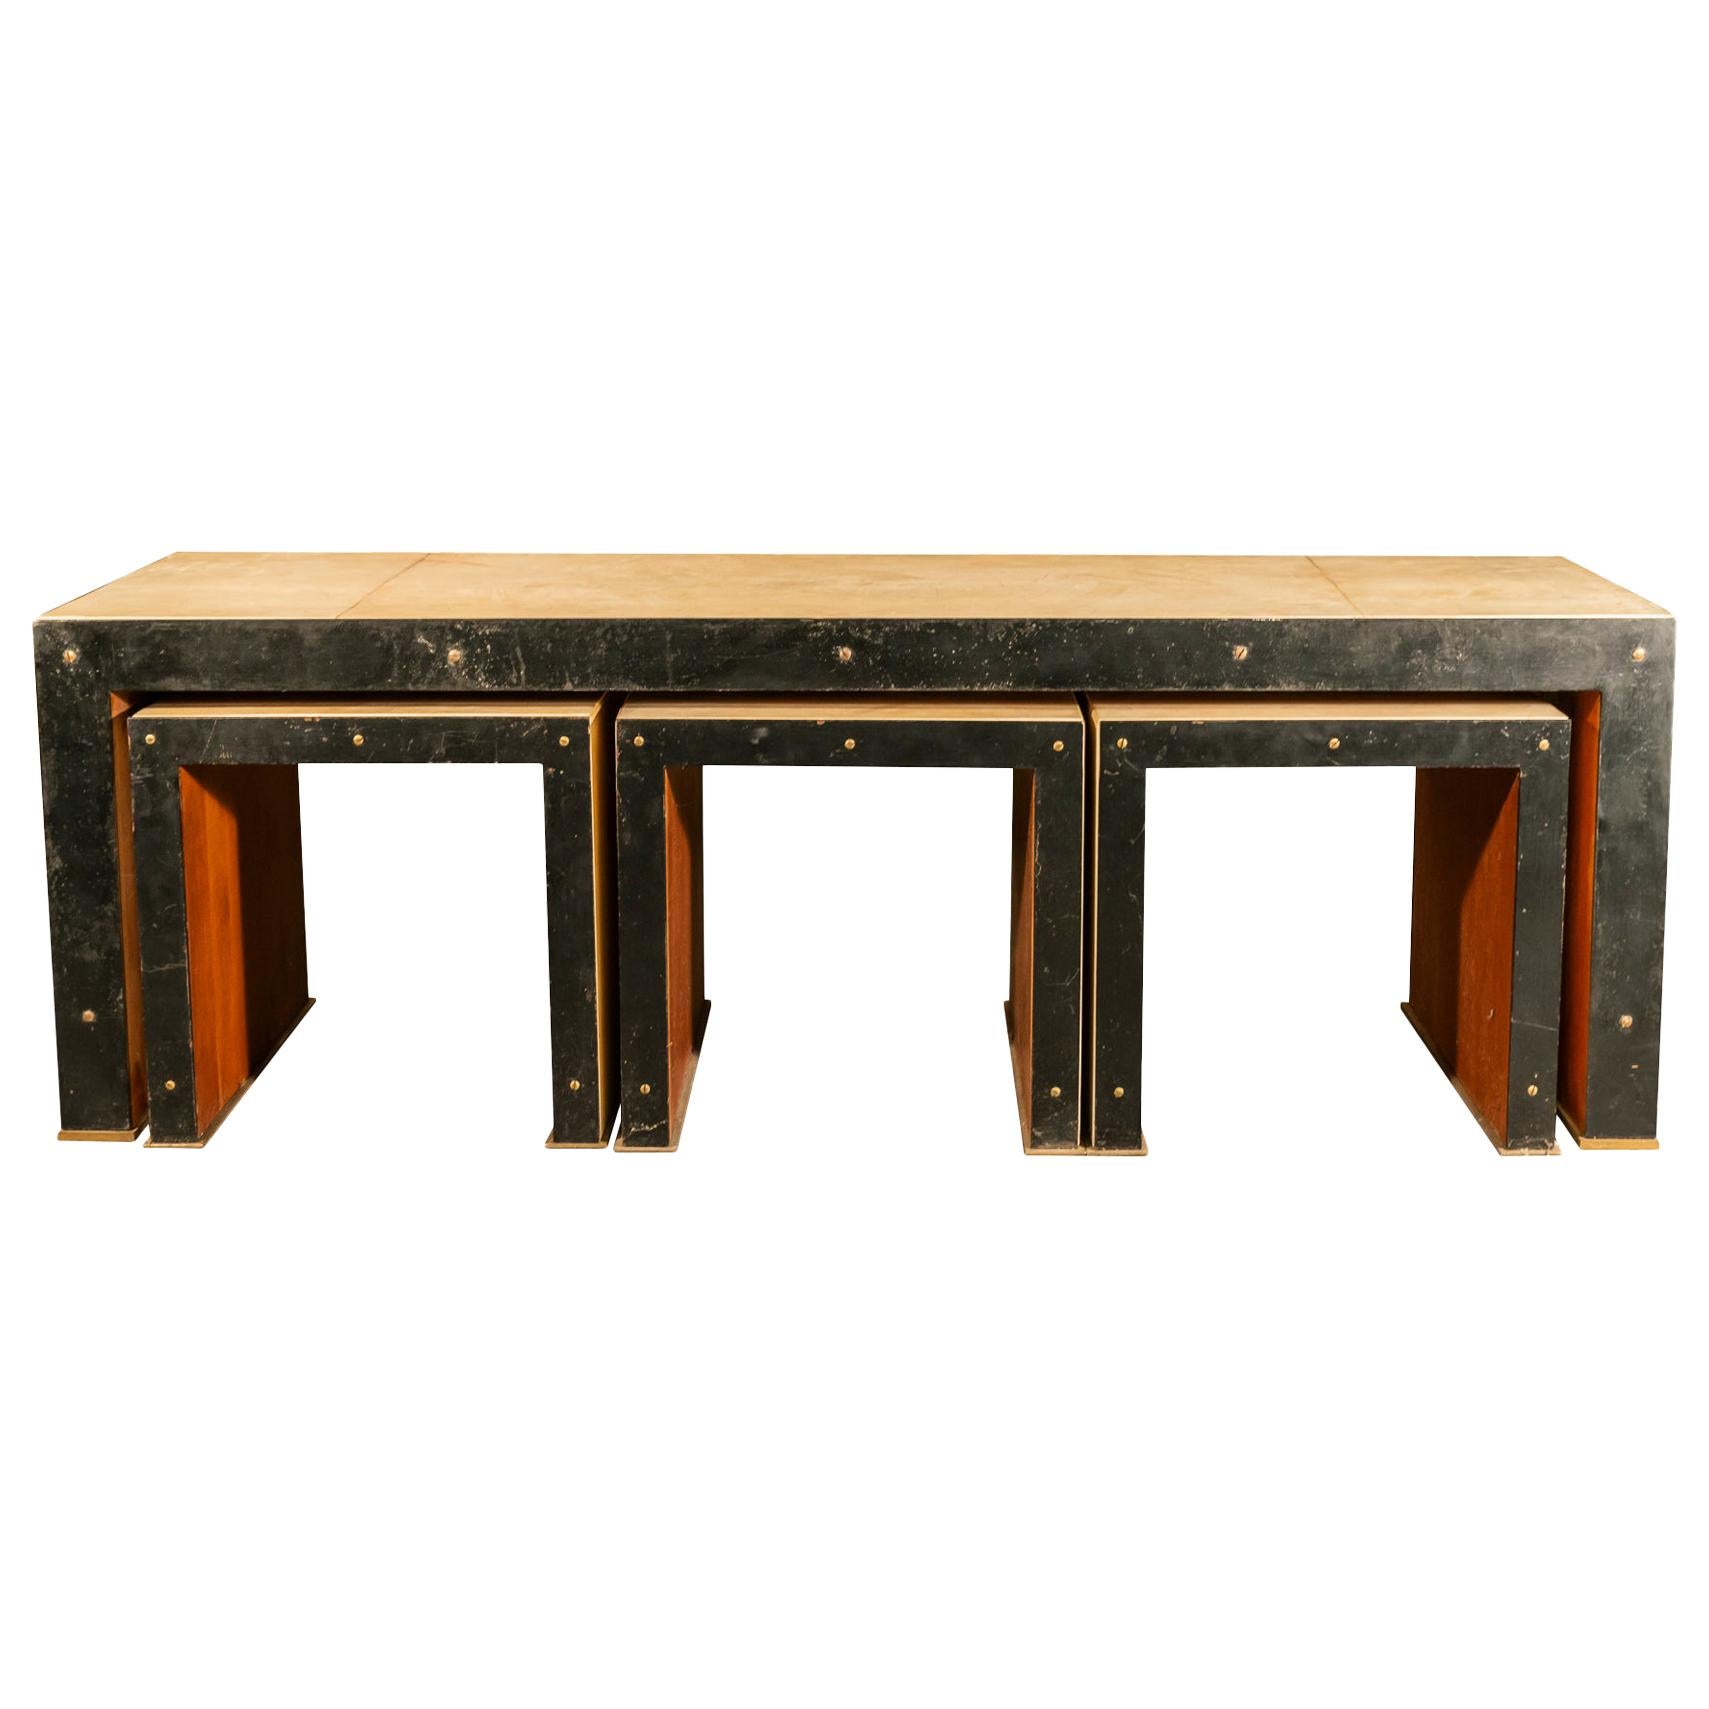 In the Style of Dupré-Lafon, Coffee Table in Four Elements, circa 1980